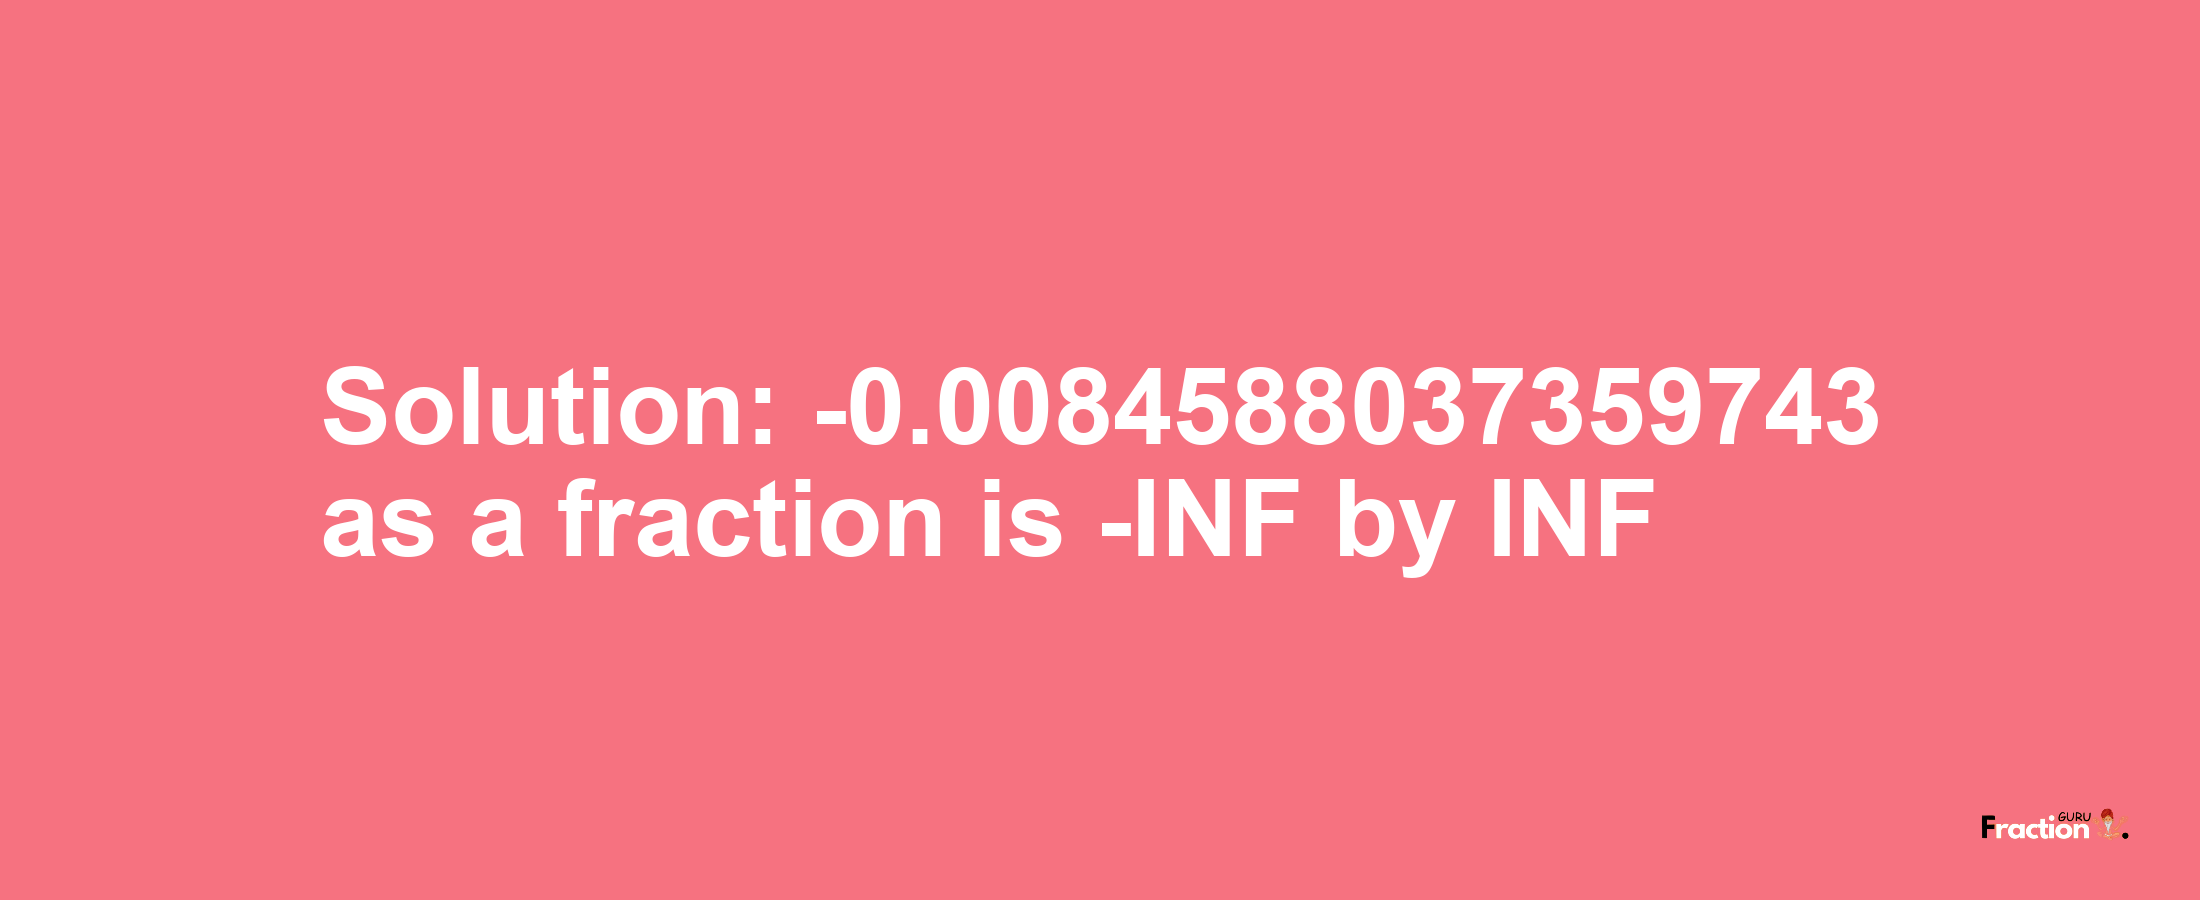 Solution:-0.0084588037359743 as a fraction is -INF/INF